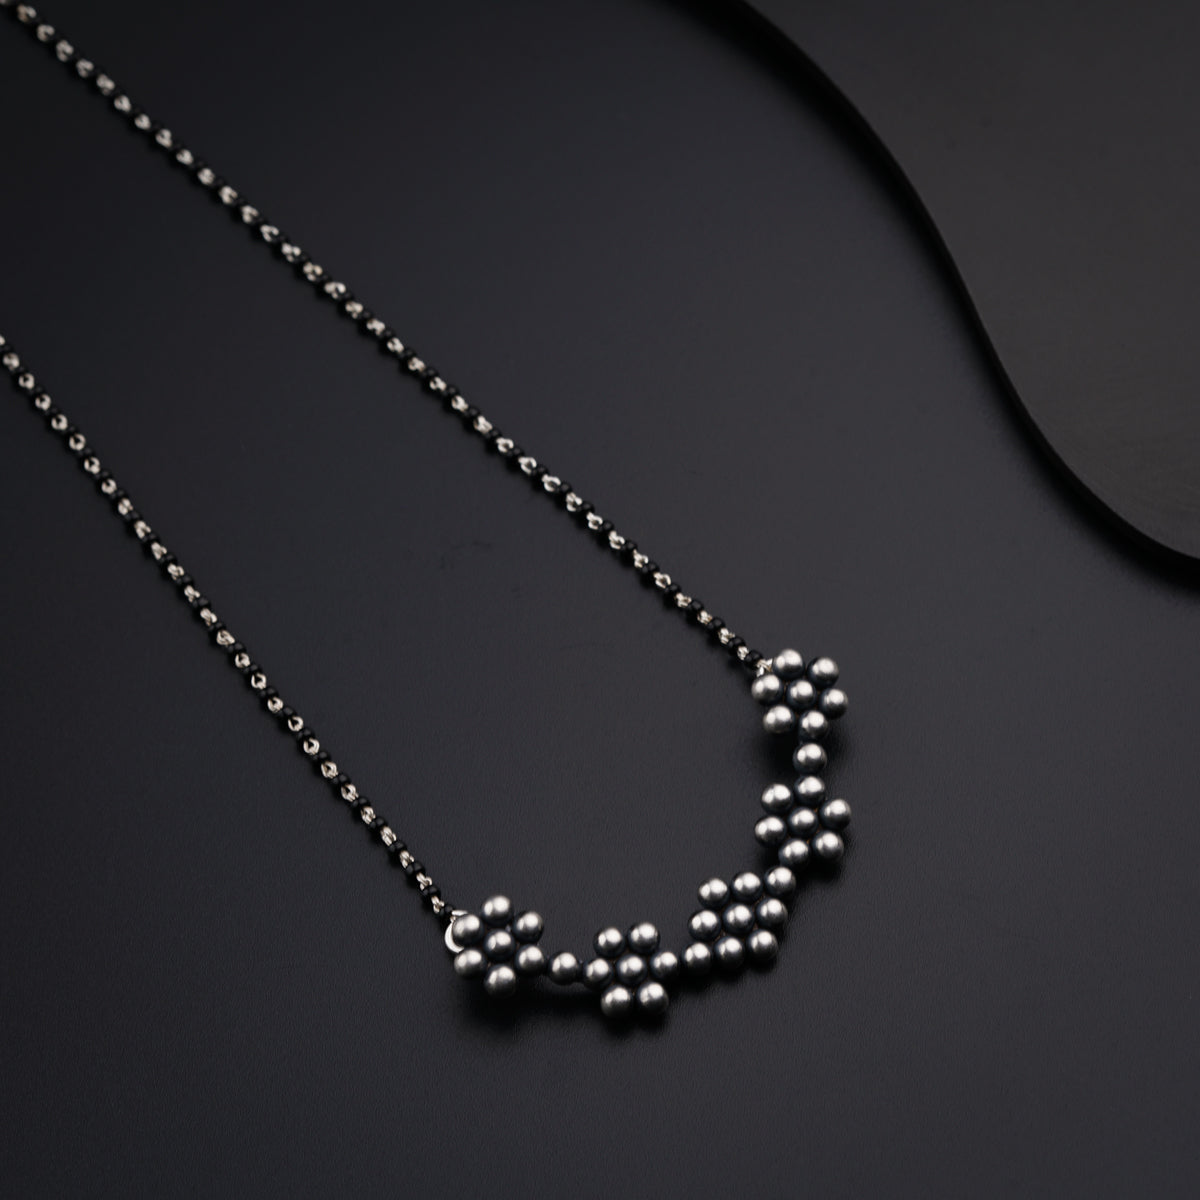 a necklace with balls on a black surface